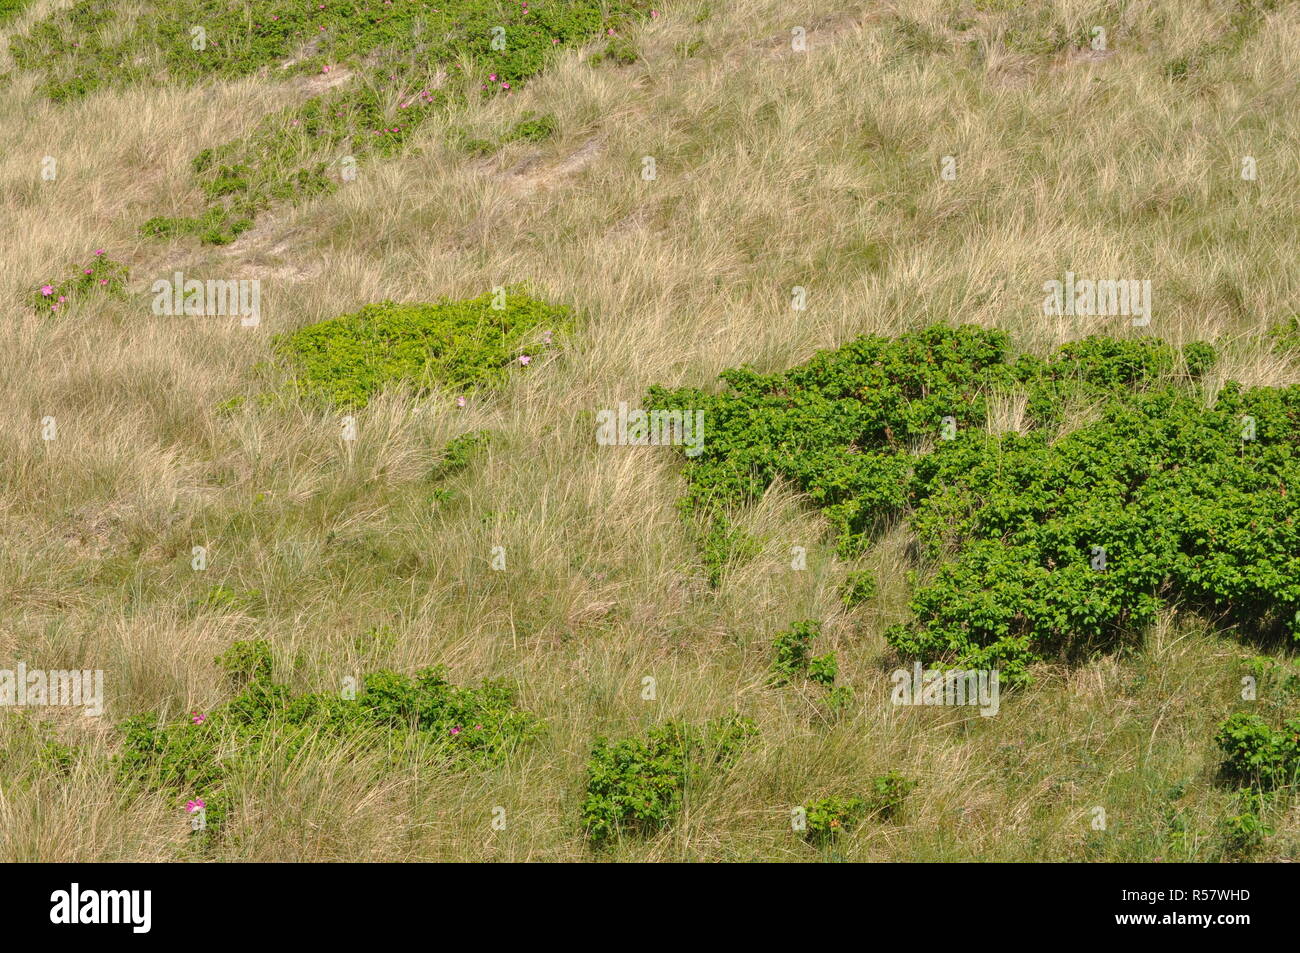 dune landscape with long grasses and other vegetation Stock Photo